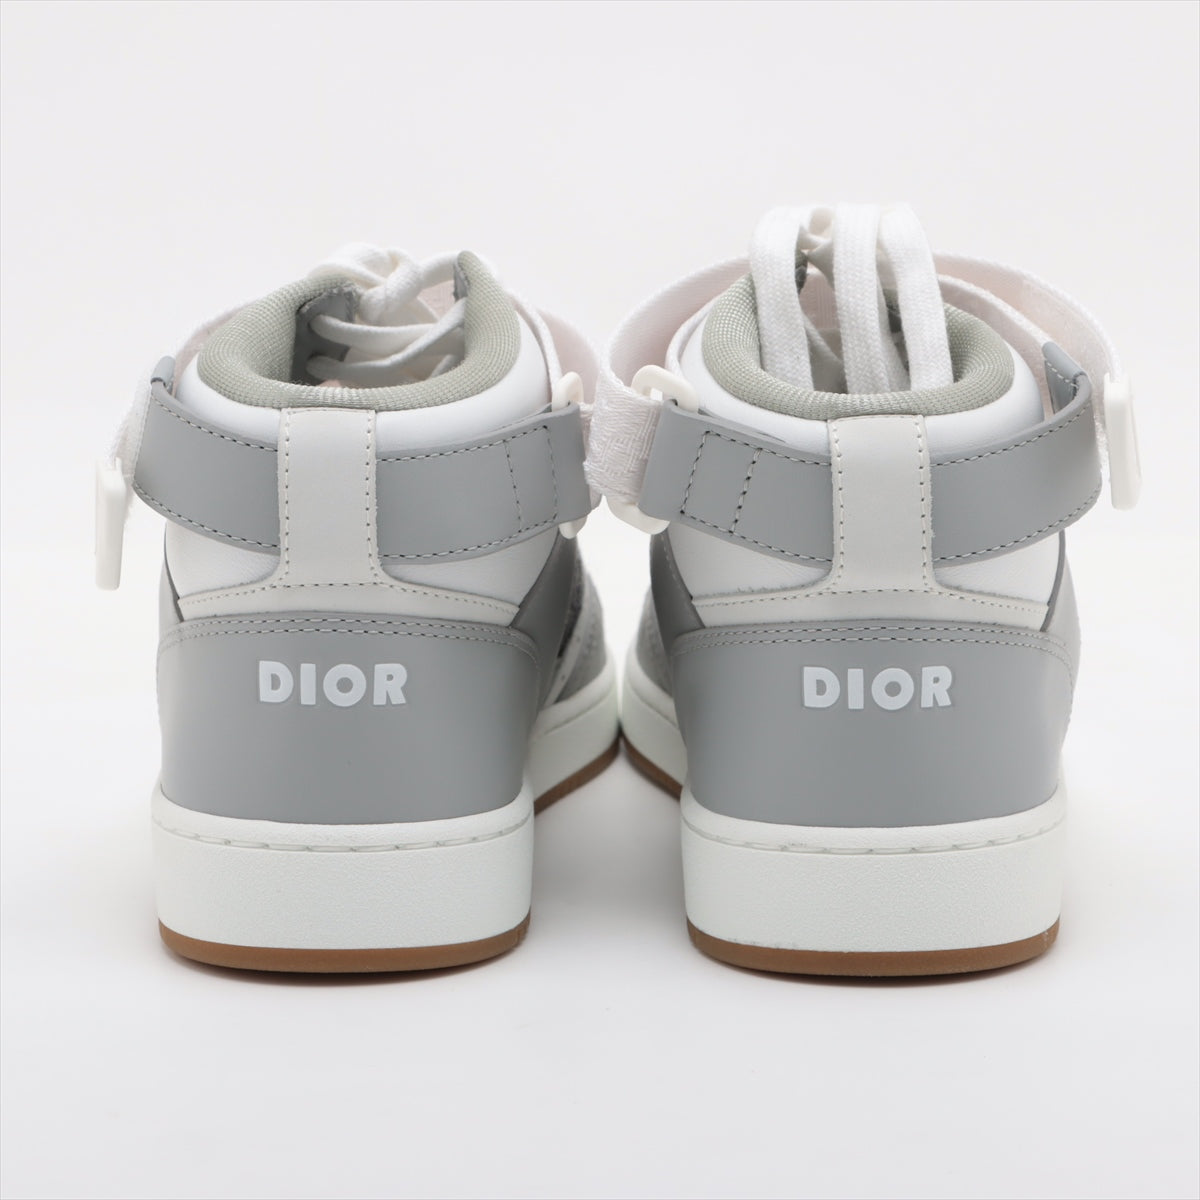 Dior Oblique Canvas & Leather High-top Sneakers 40 Men's Gray x white 21CNV